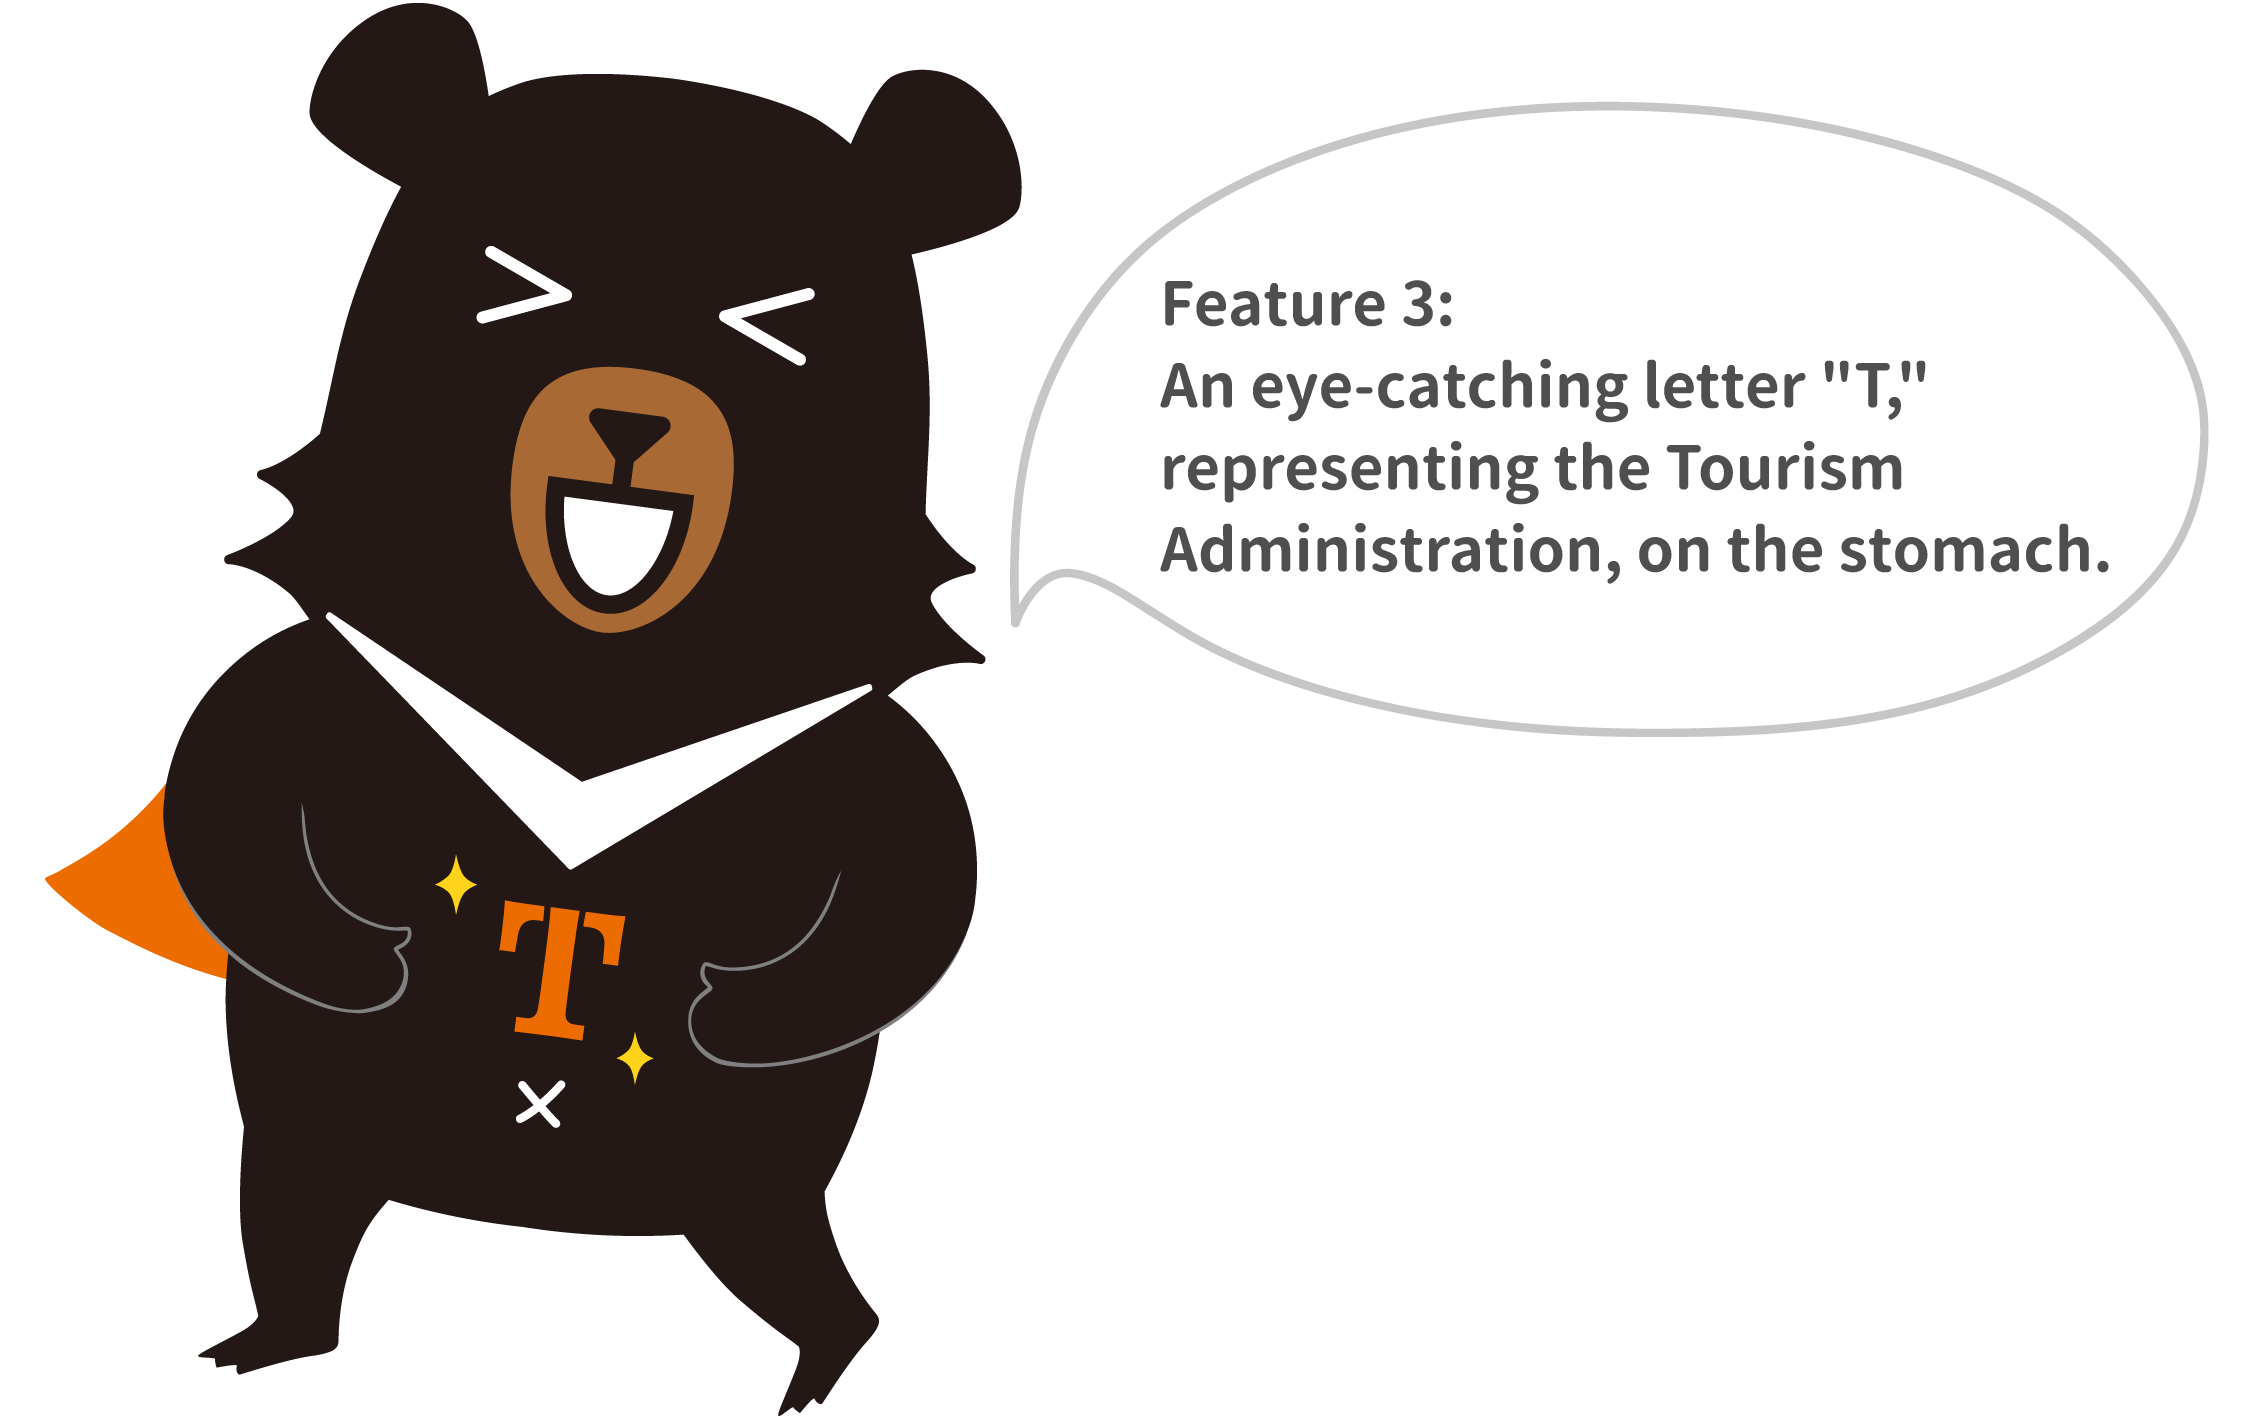 Feature 3:
An eye-catching letter "T," representing the Tourism Bureau, on the stomach.
